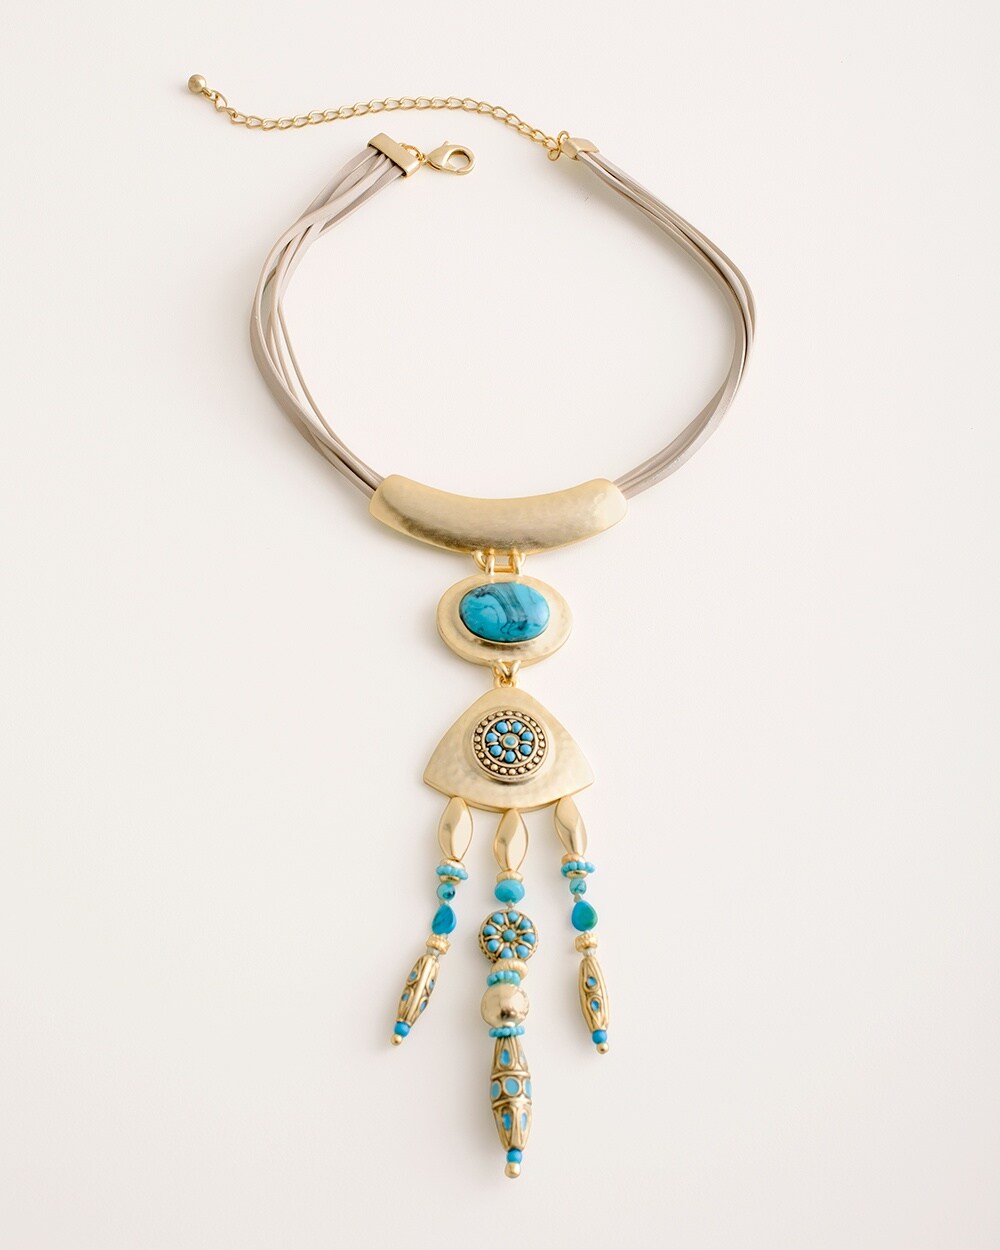 Turquoise-Hued Double-Drop Bib Necklace